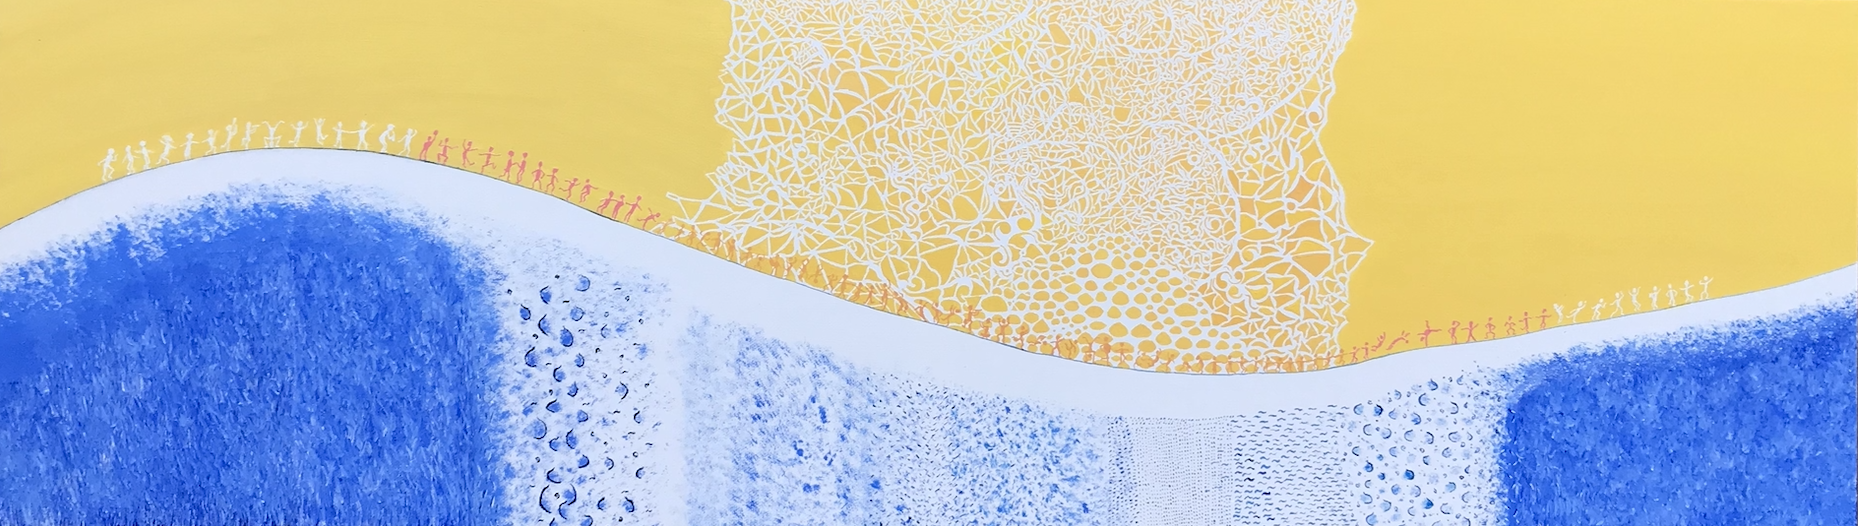 A horizontal oil painting containing one big blue wave on the lower half and a bright yellow sky on the upper half. On the wave is a line of small, intricately drawn dancing figures and in the middle of the painting shows a highly detailed pattern with an effect that looks similar to shattered glass.